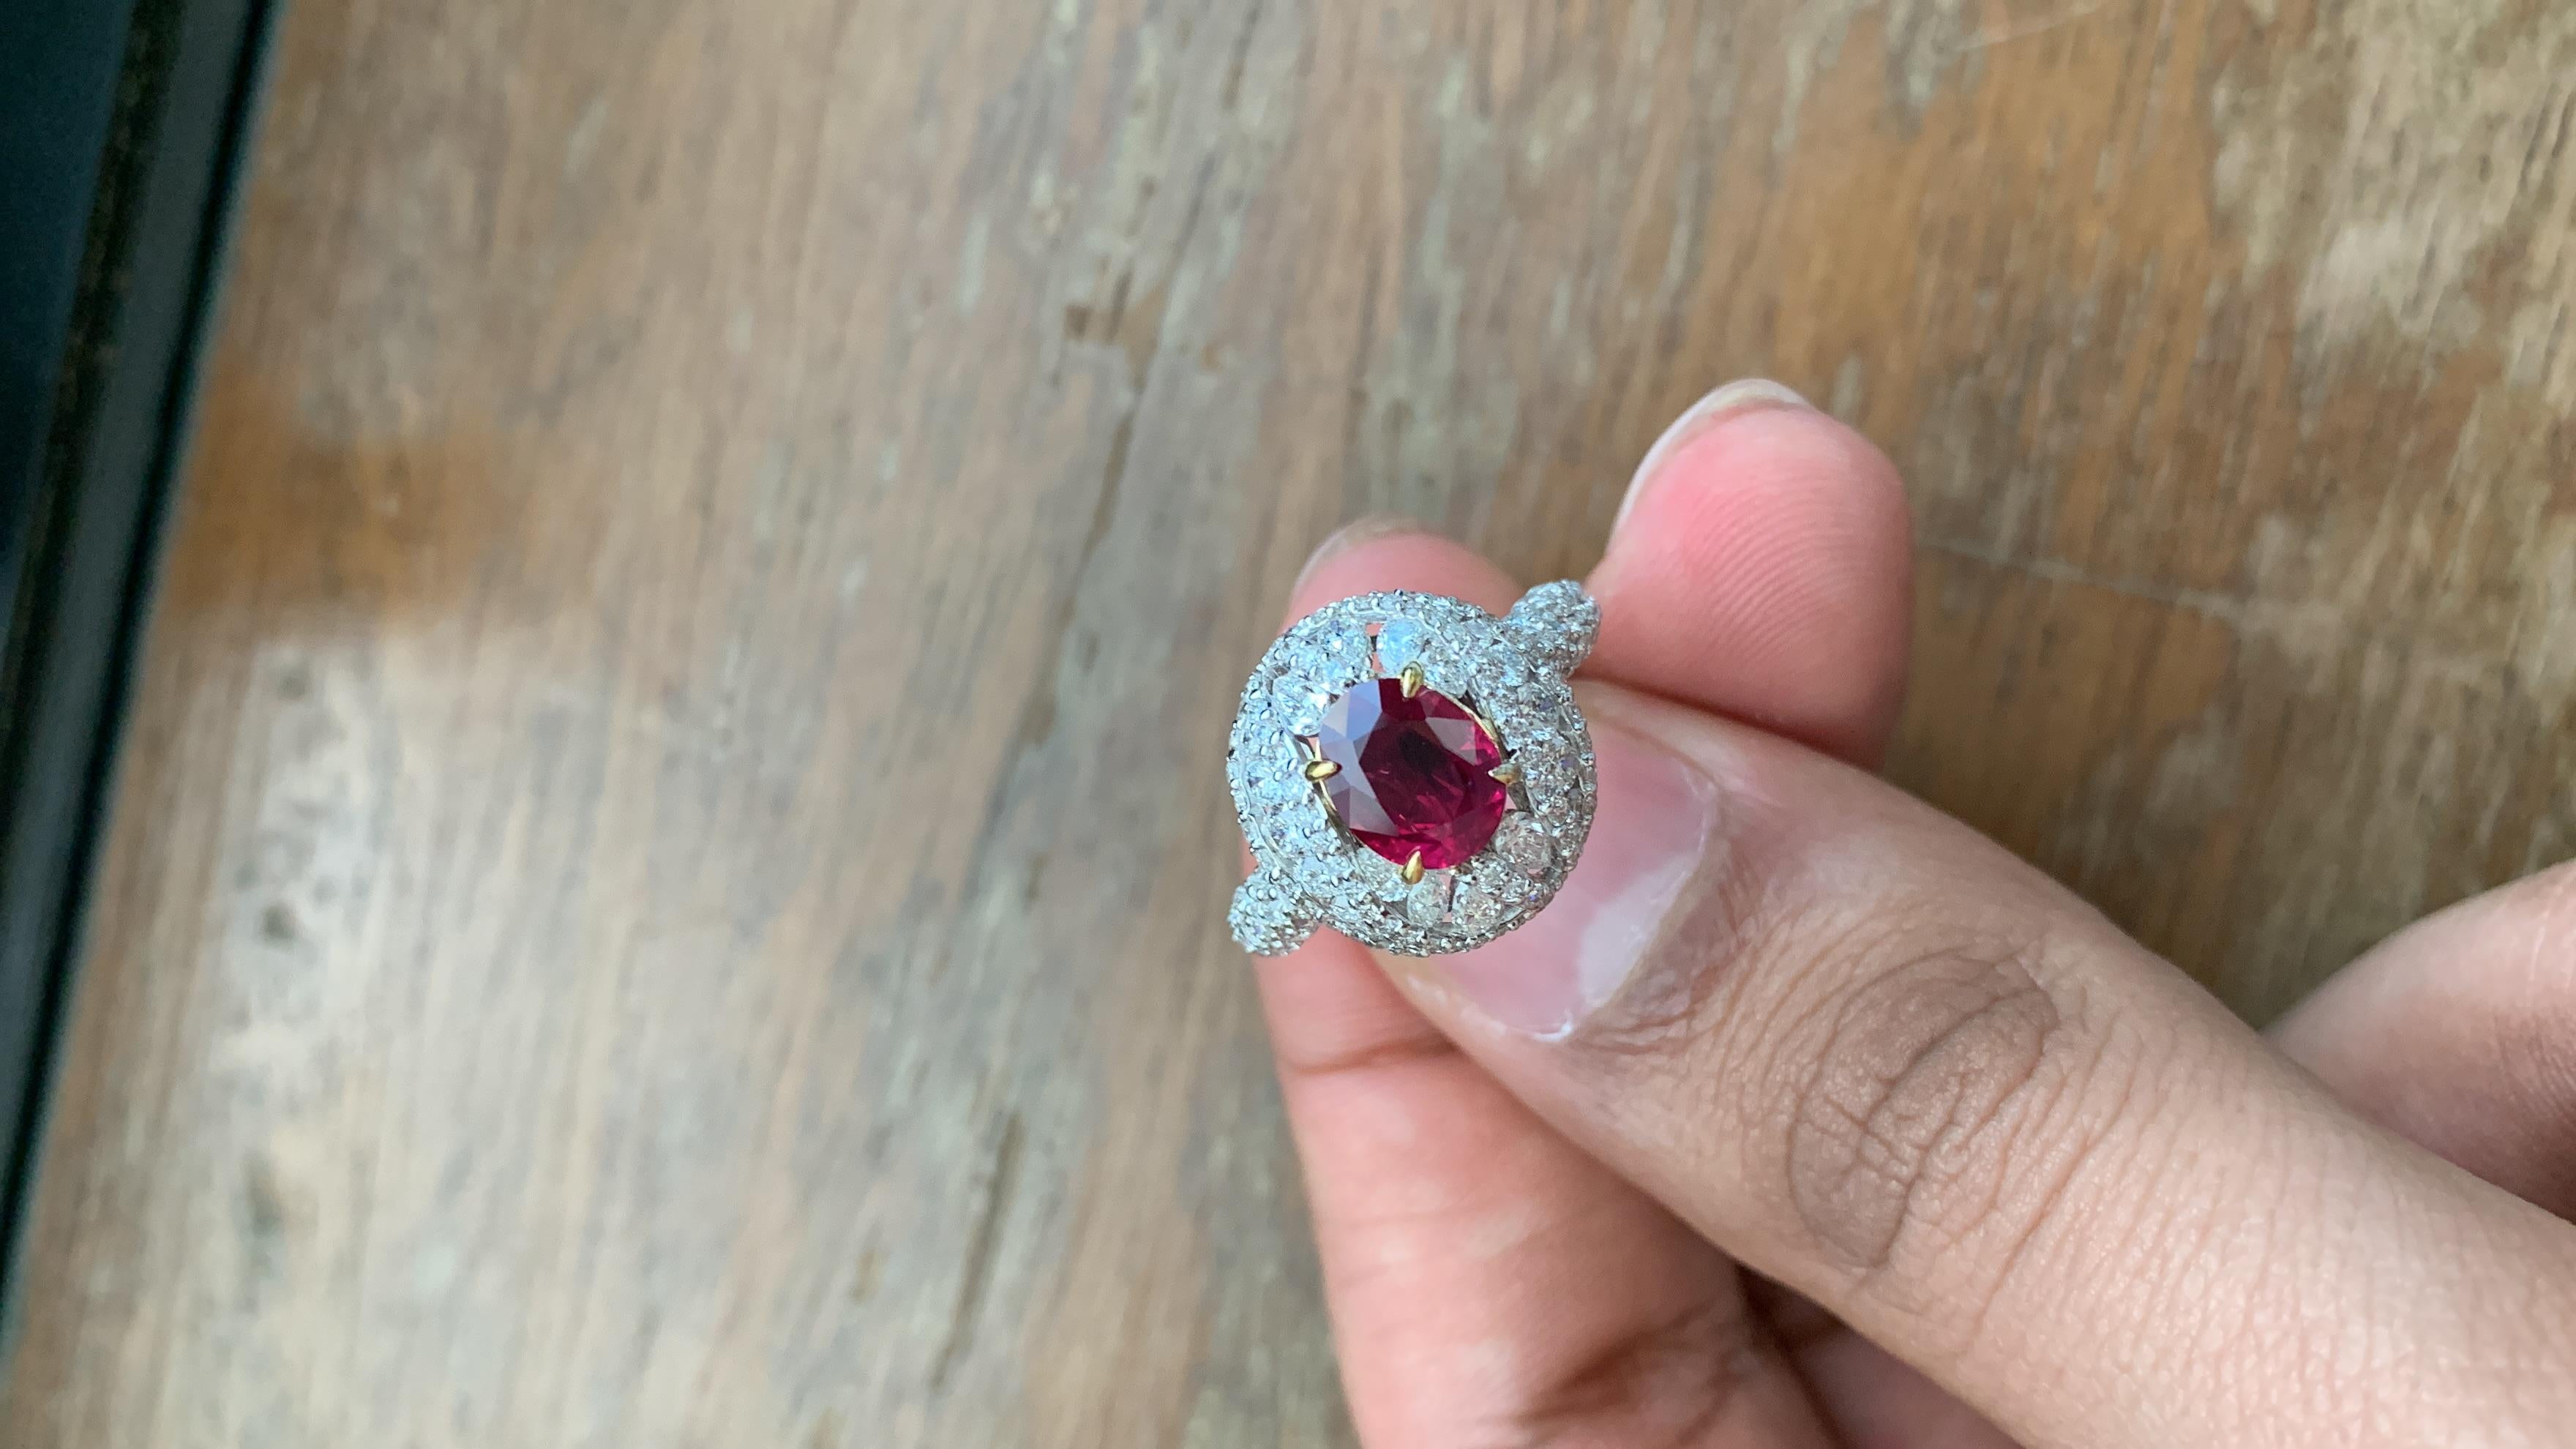 A brand new handcrafted ruby ring by Rewa Jewels. The ring's center stone is 1.83 carat Burmese ruby certified by Gem Research Swisslab (GRS) as natural, unheated, 'Pigeon blood' with the certificate number: 2022-060406. The centre ruby has been set